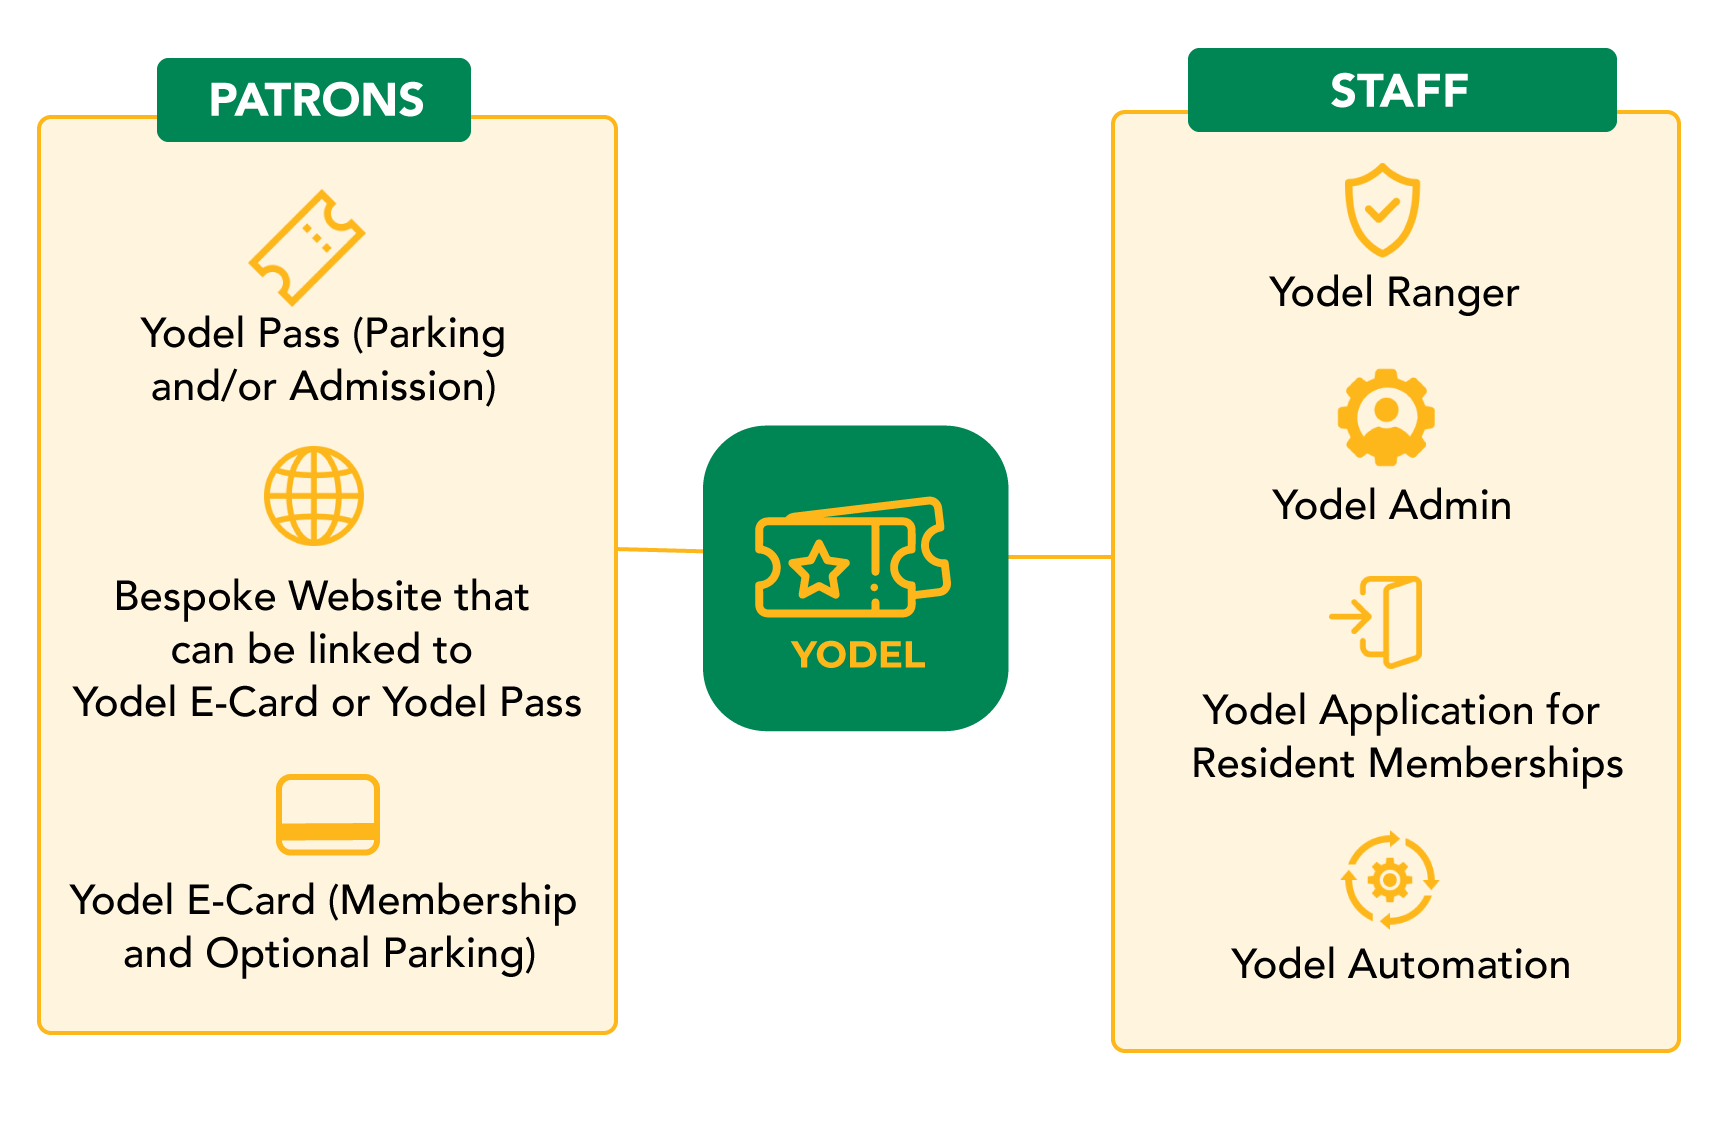 Yodel Provides Benefits for Patrons and Staff